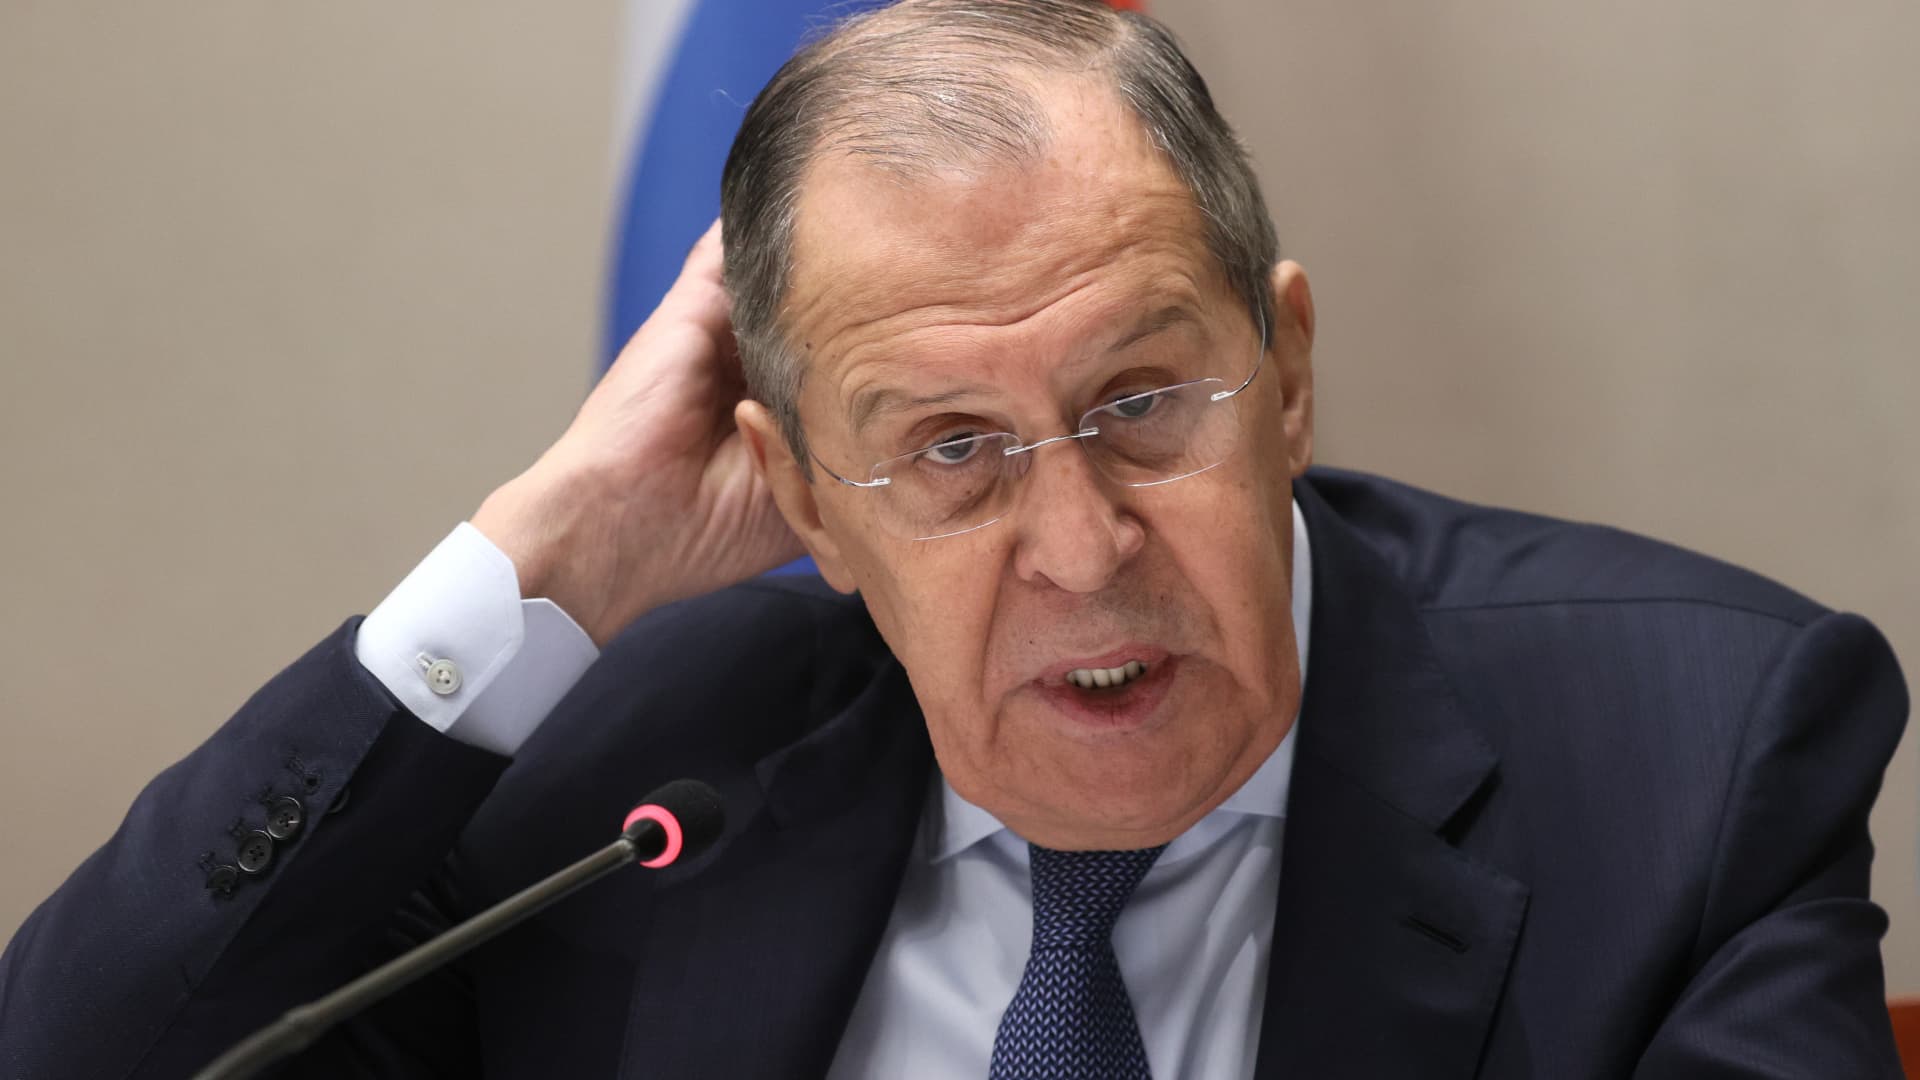 Russia's Foreign Minister Sergei Lavrov attends a press conference following security talks with US Secretary of State Antony Blinken at the Hotel President Wilson.